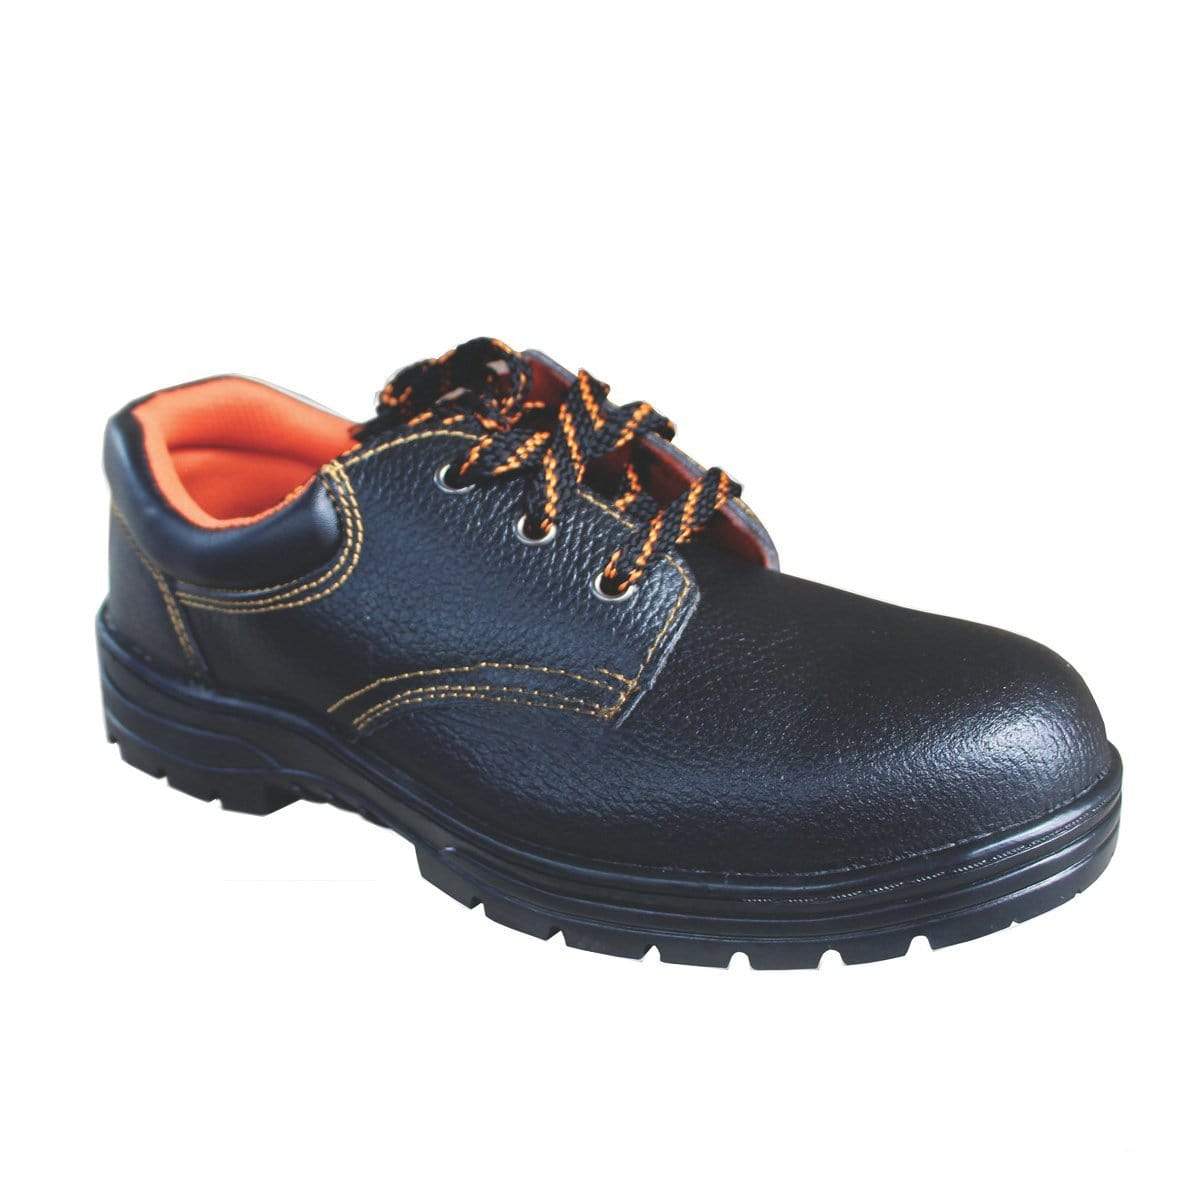 ANEKA Worker Safety Shoes Safety Boots Steel Toe Cap Kasut UK10 1000#